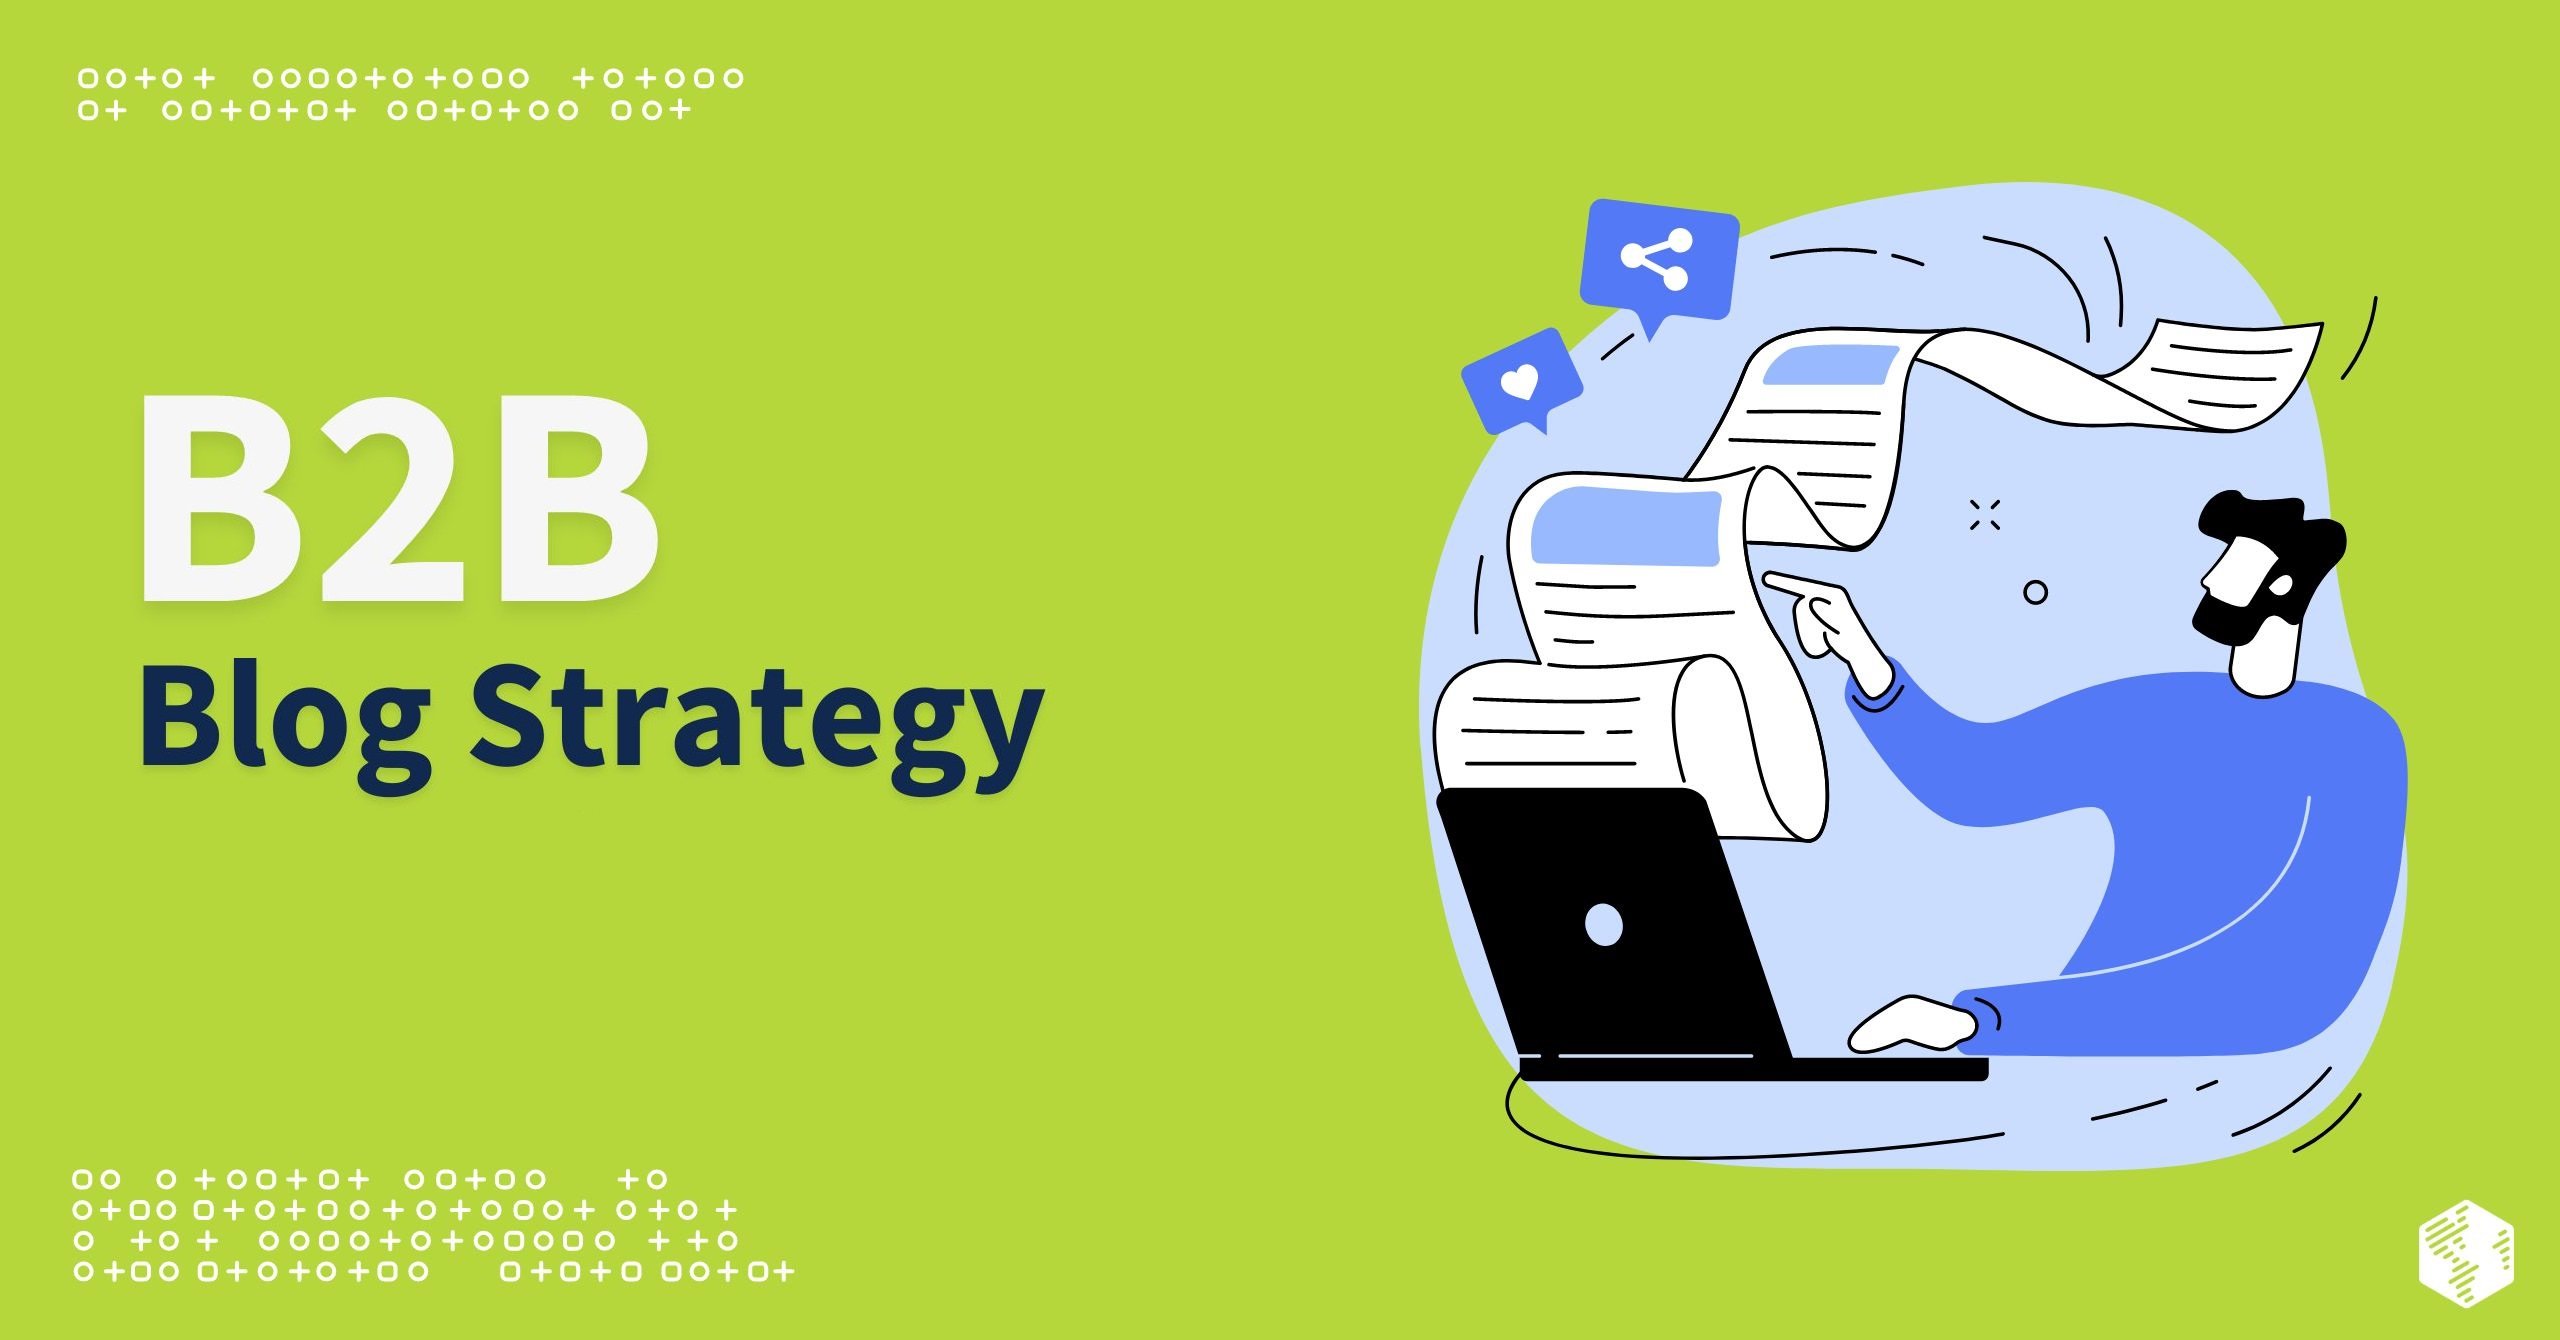 B2B Blog Strategy to Implement in 2023